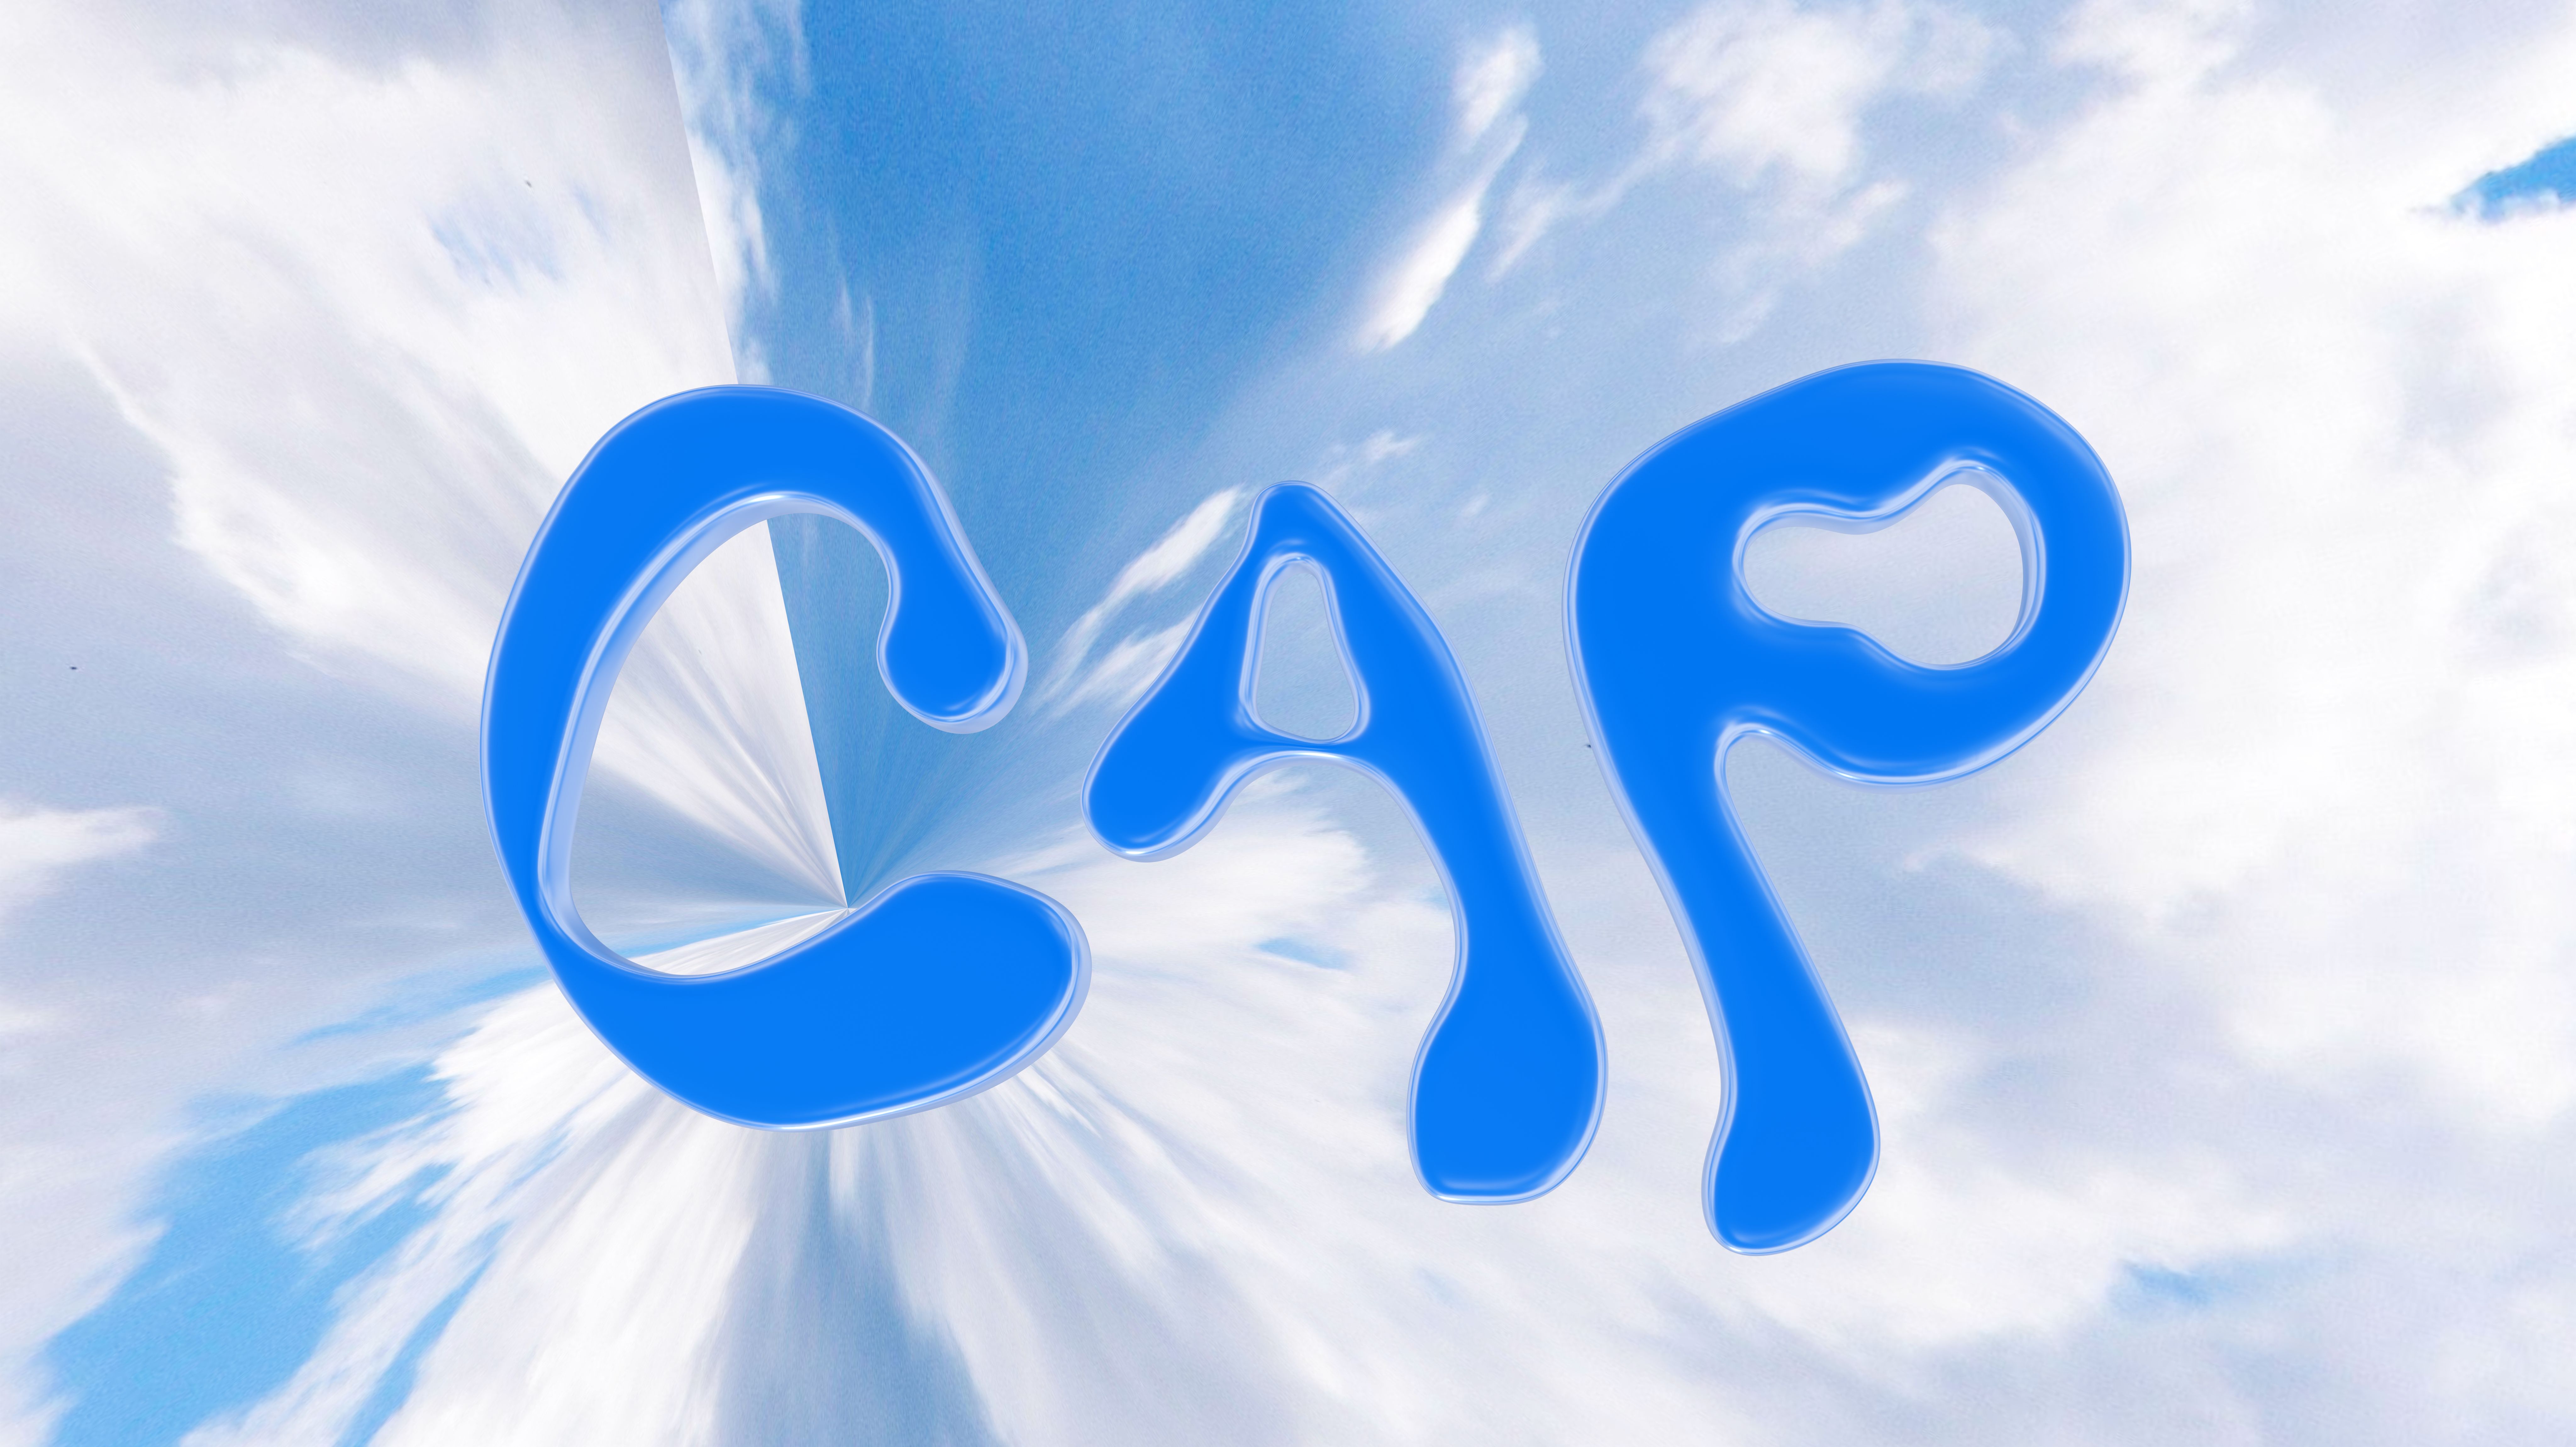 CAP in blue letters on a swirly blue and white background